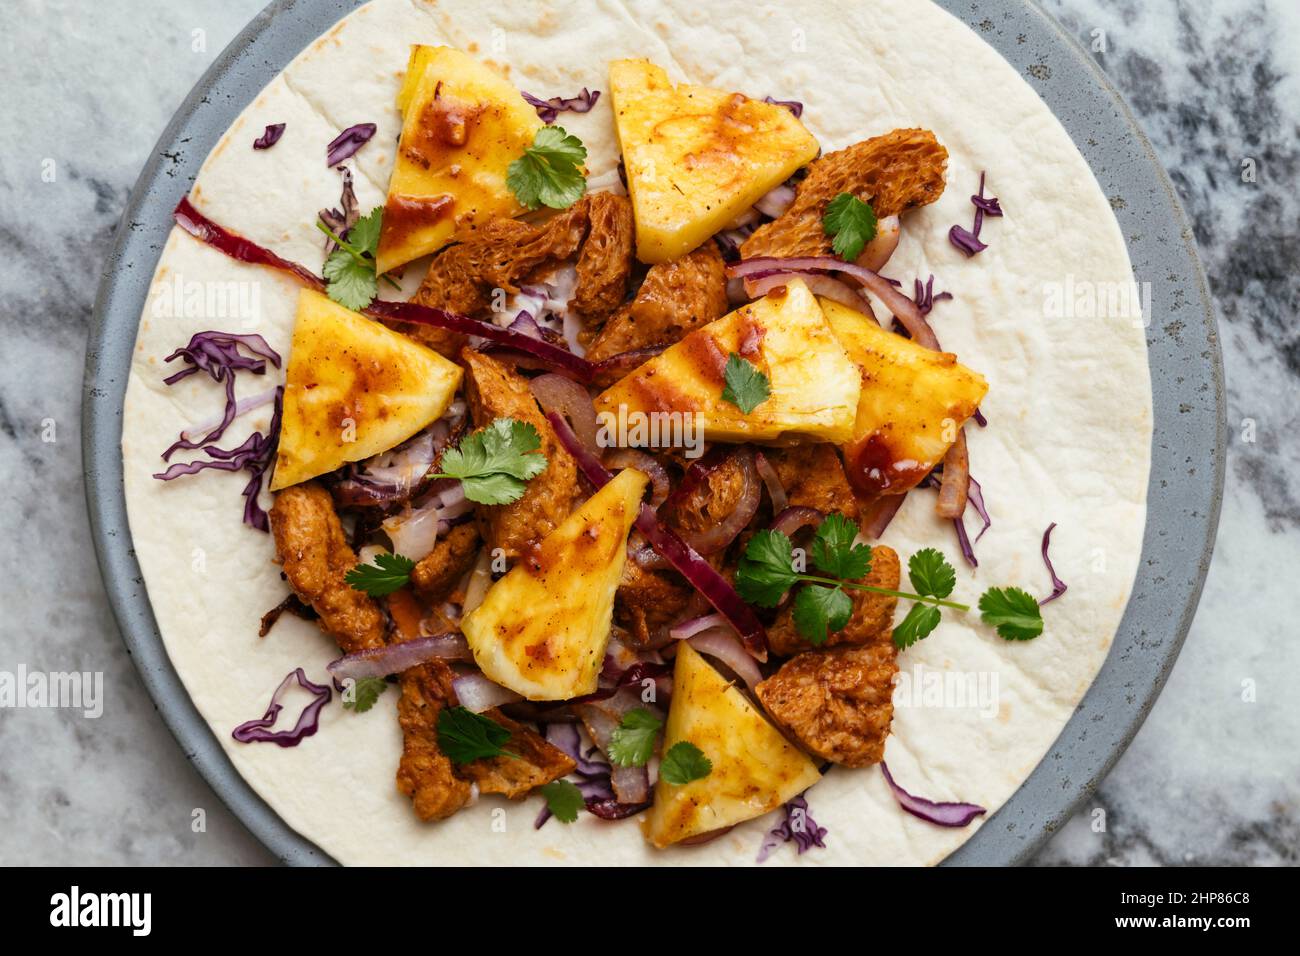 Burritos with Spicy TVP Curls, Cabbage Slaw and Fresh Pineapple Stock Photo